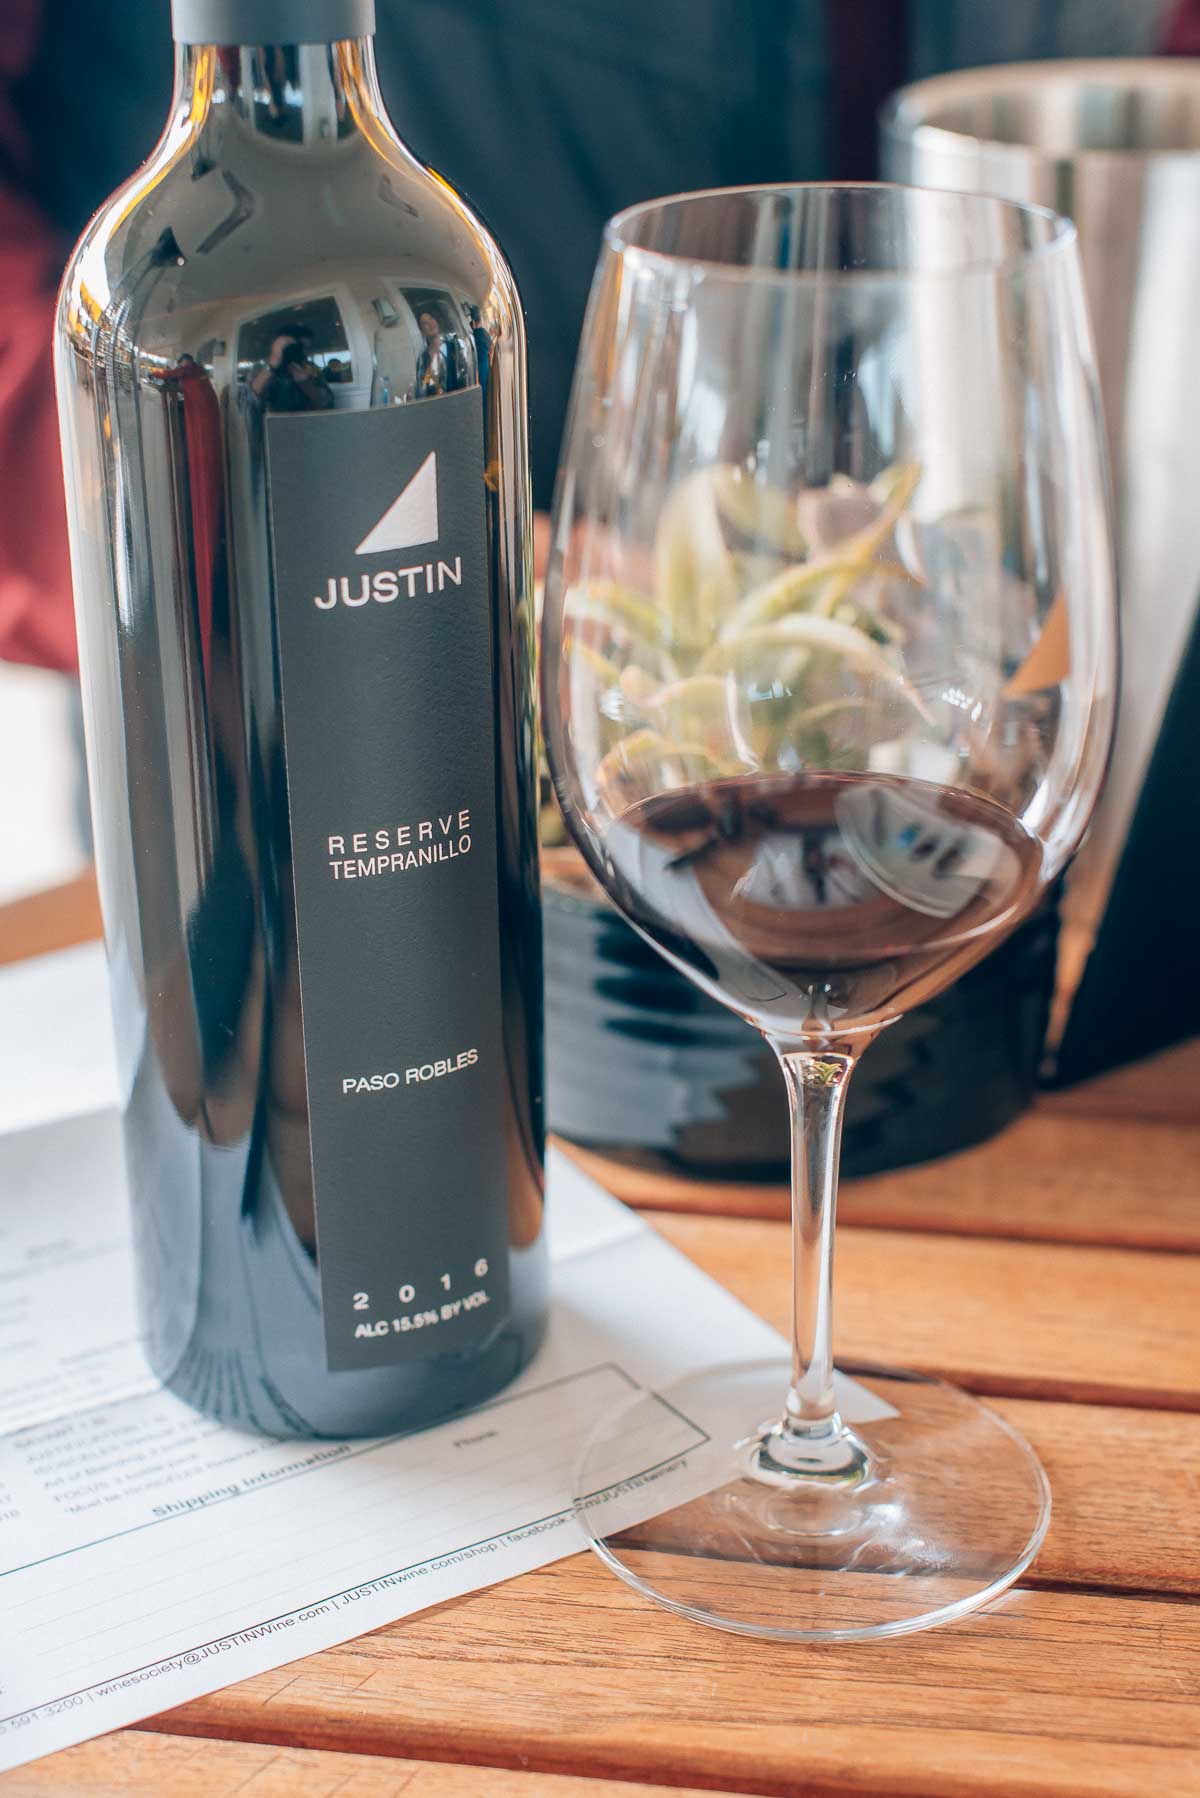 Visiting Justin Winery in Paso Robles, California